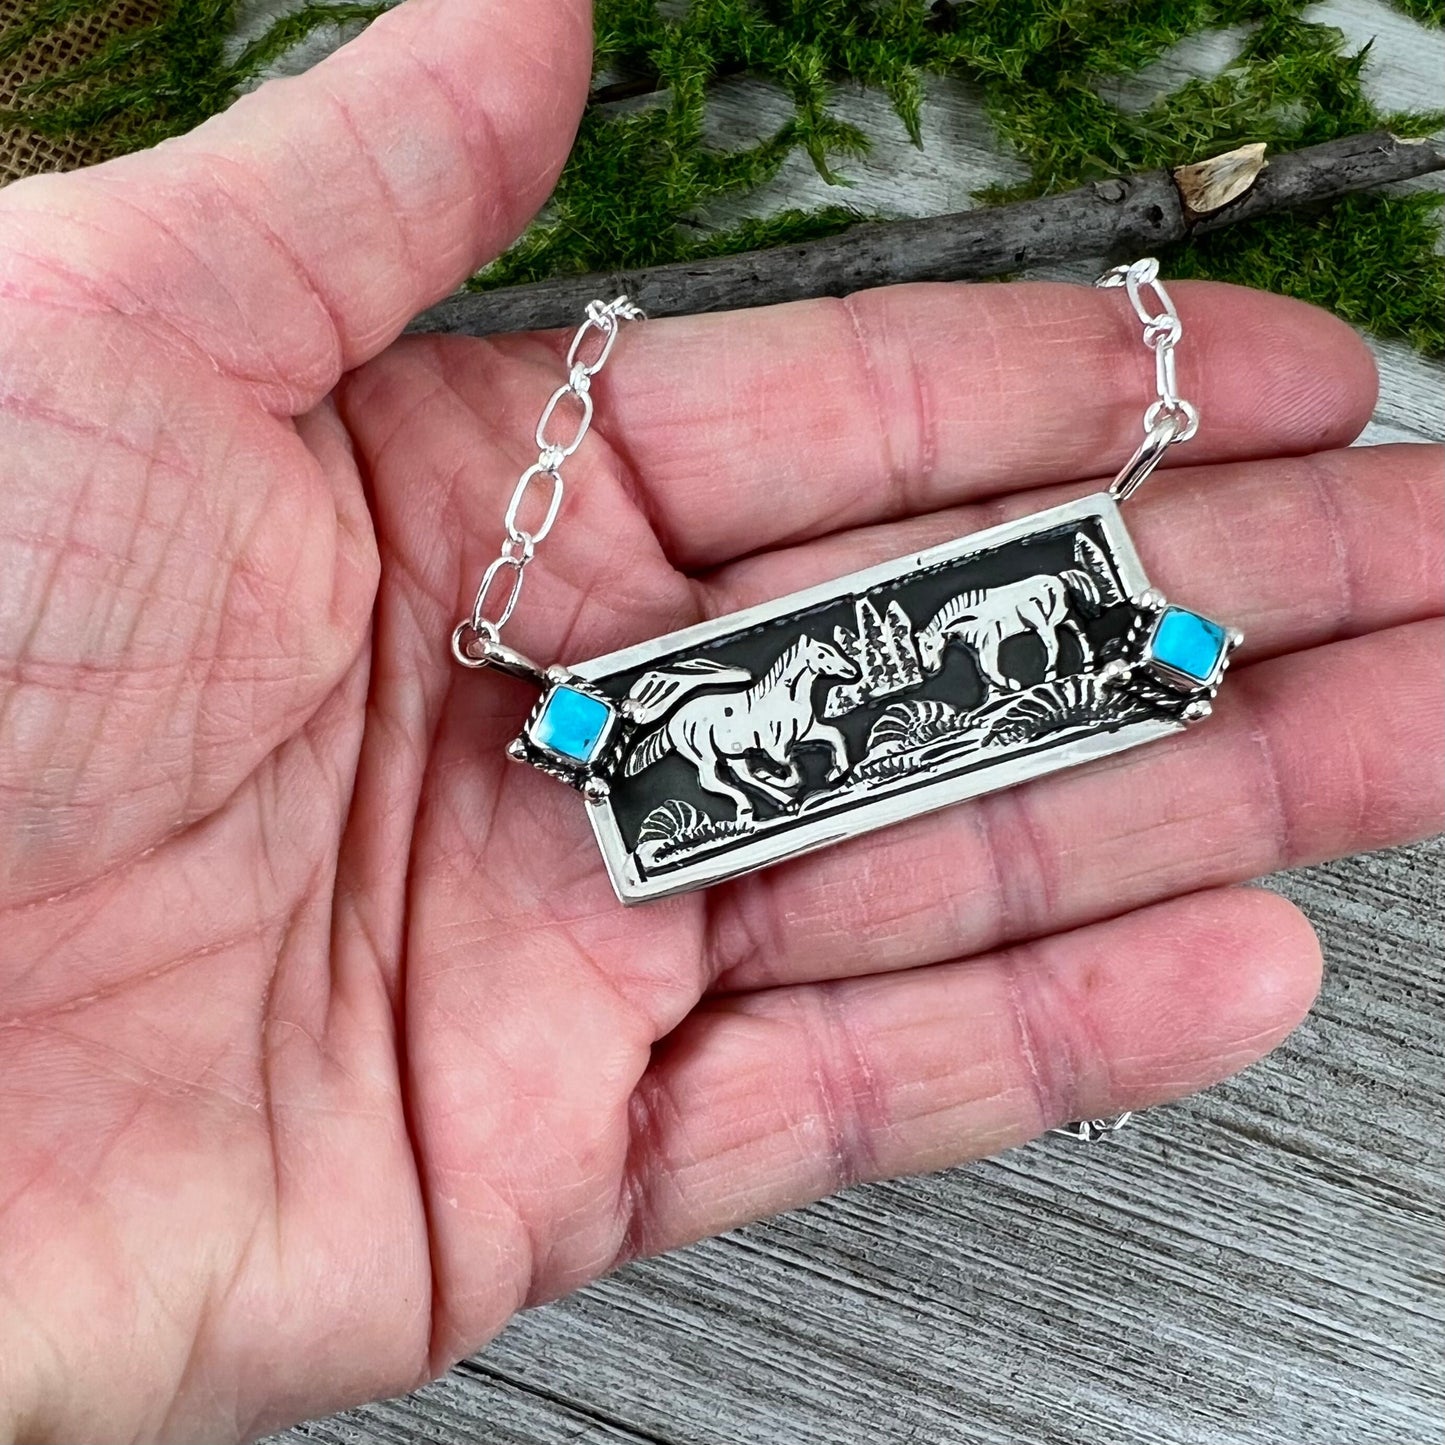 Sterling Silver Horse Design Bar Necklace, Sleeping Beauty Turquoise, Handmade by Navajo artist, Jeremy Delgarito, signed